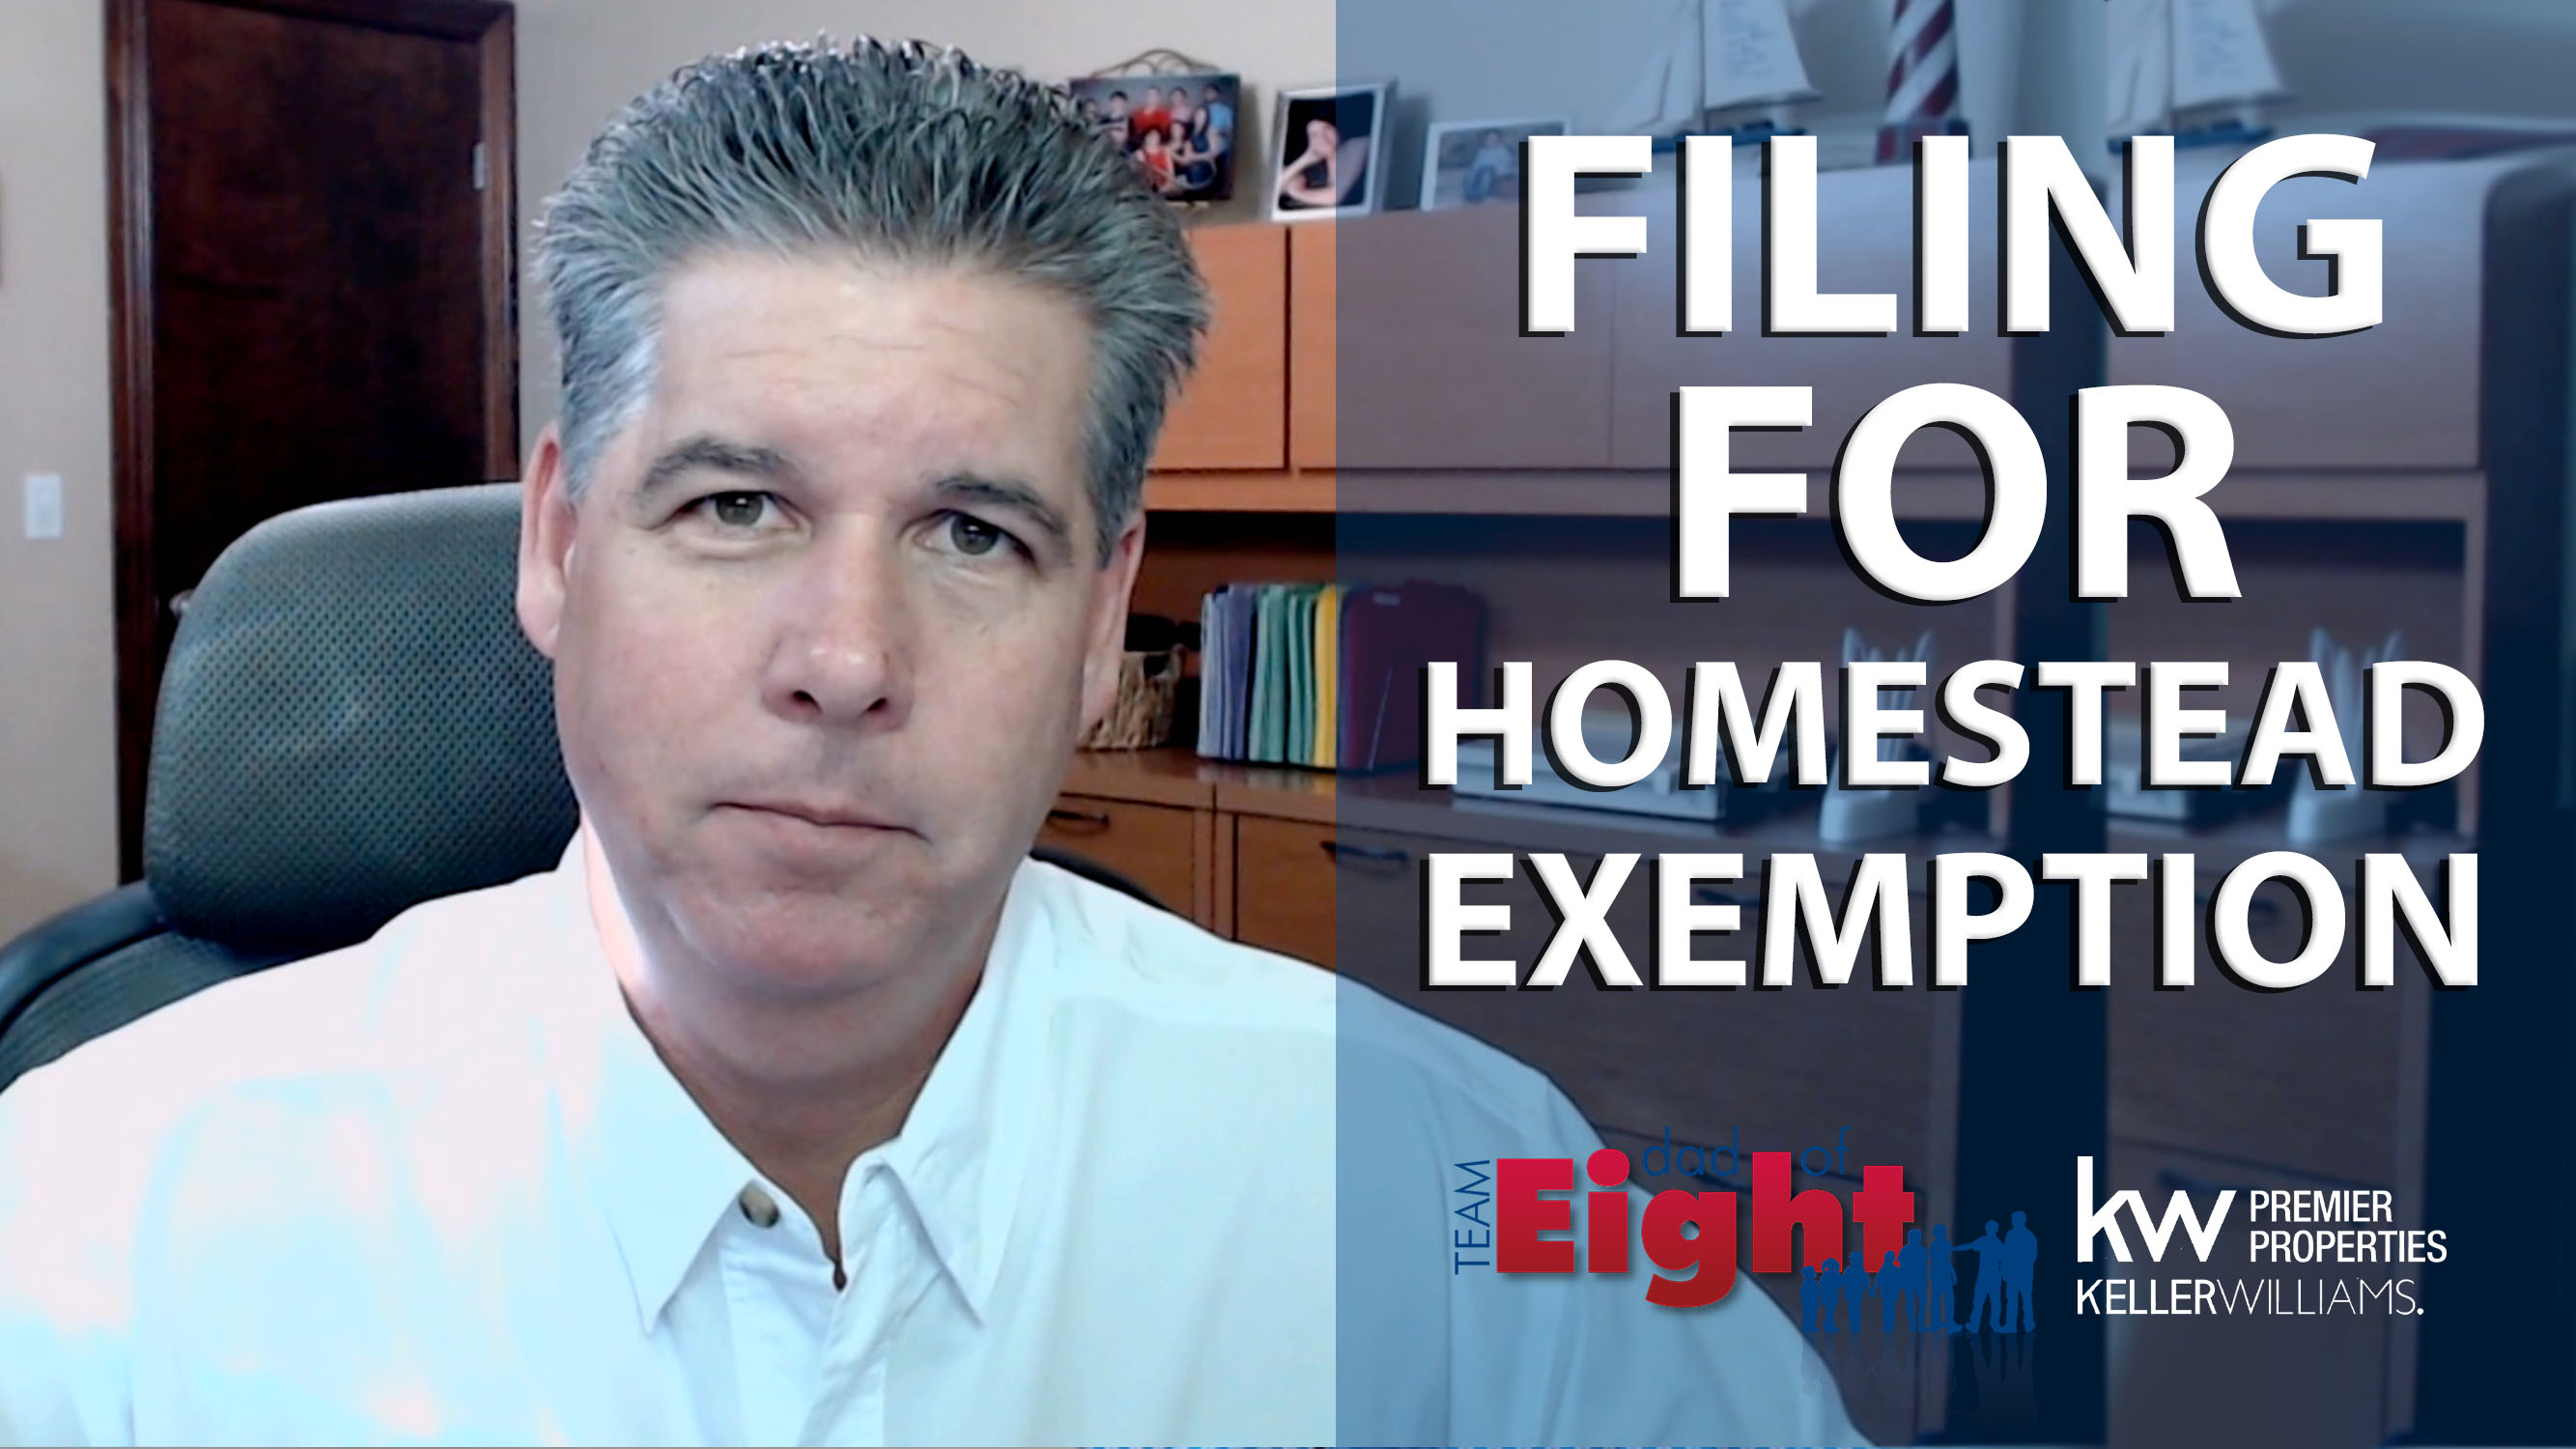 Q: How Do You File for Homestead Exemption?